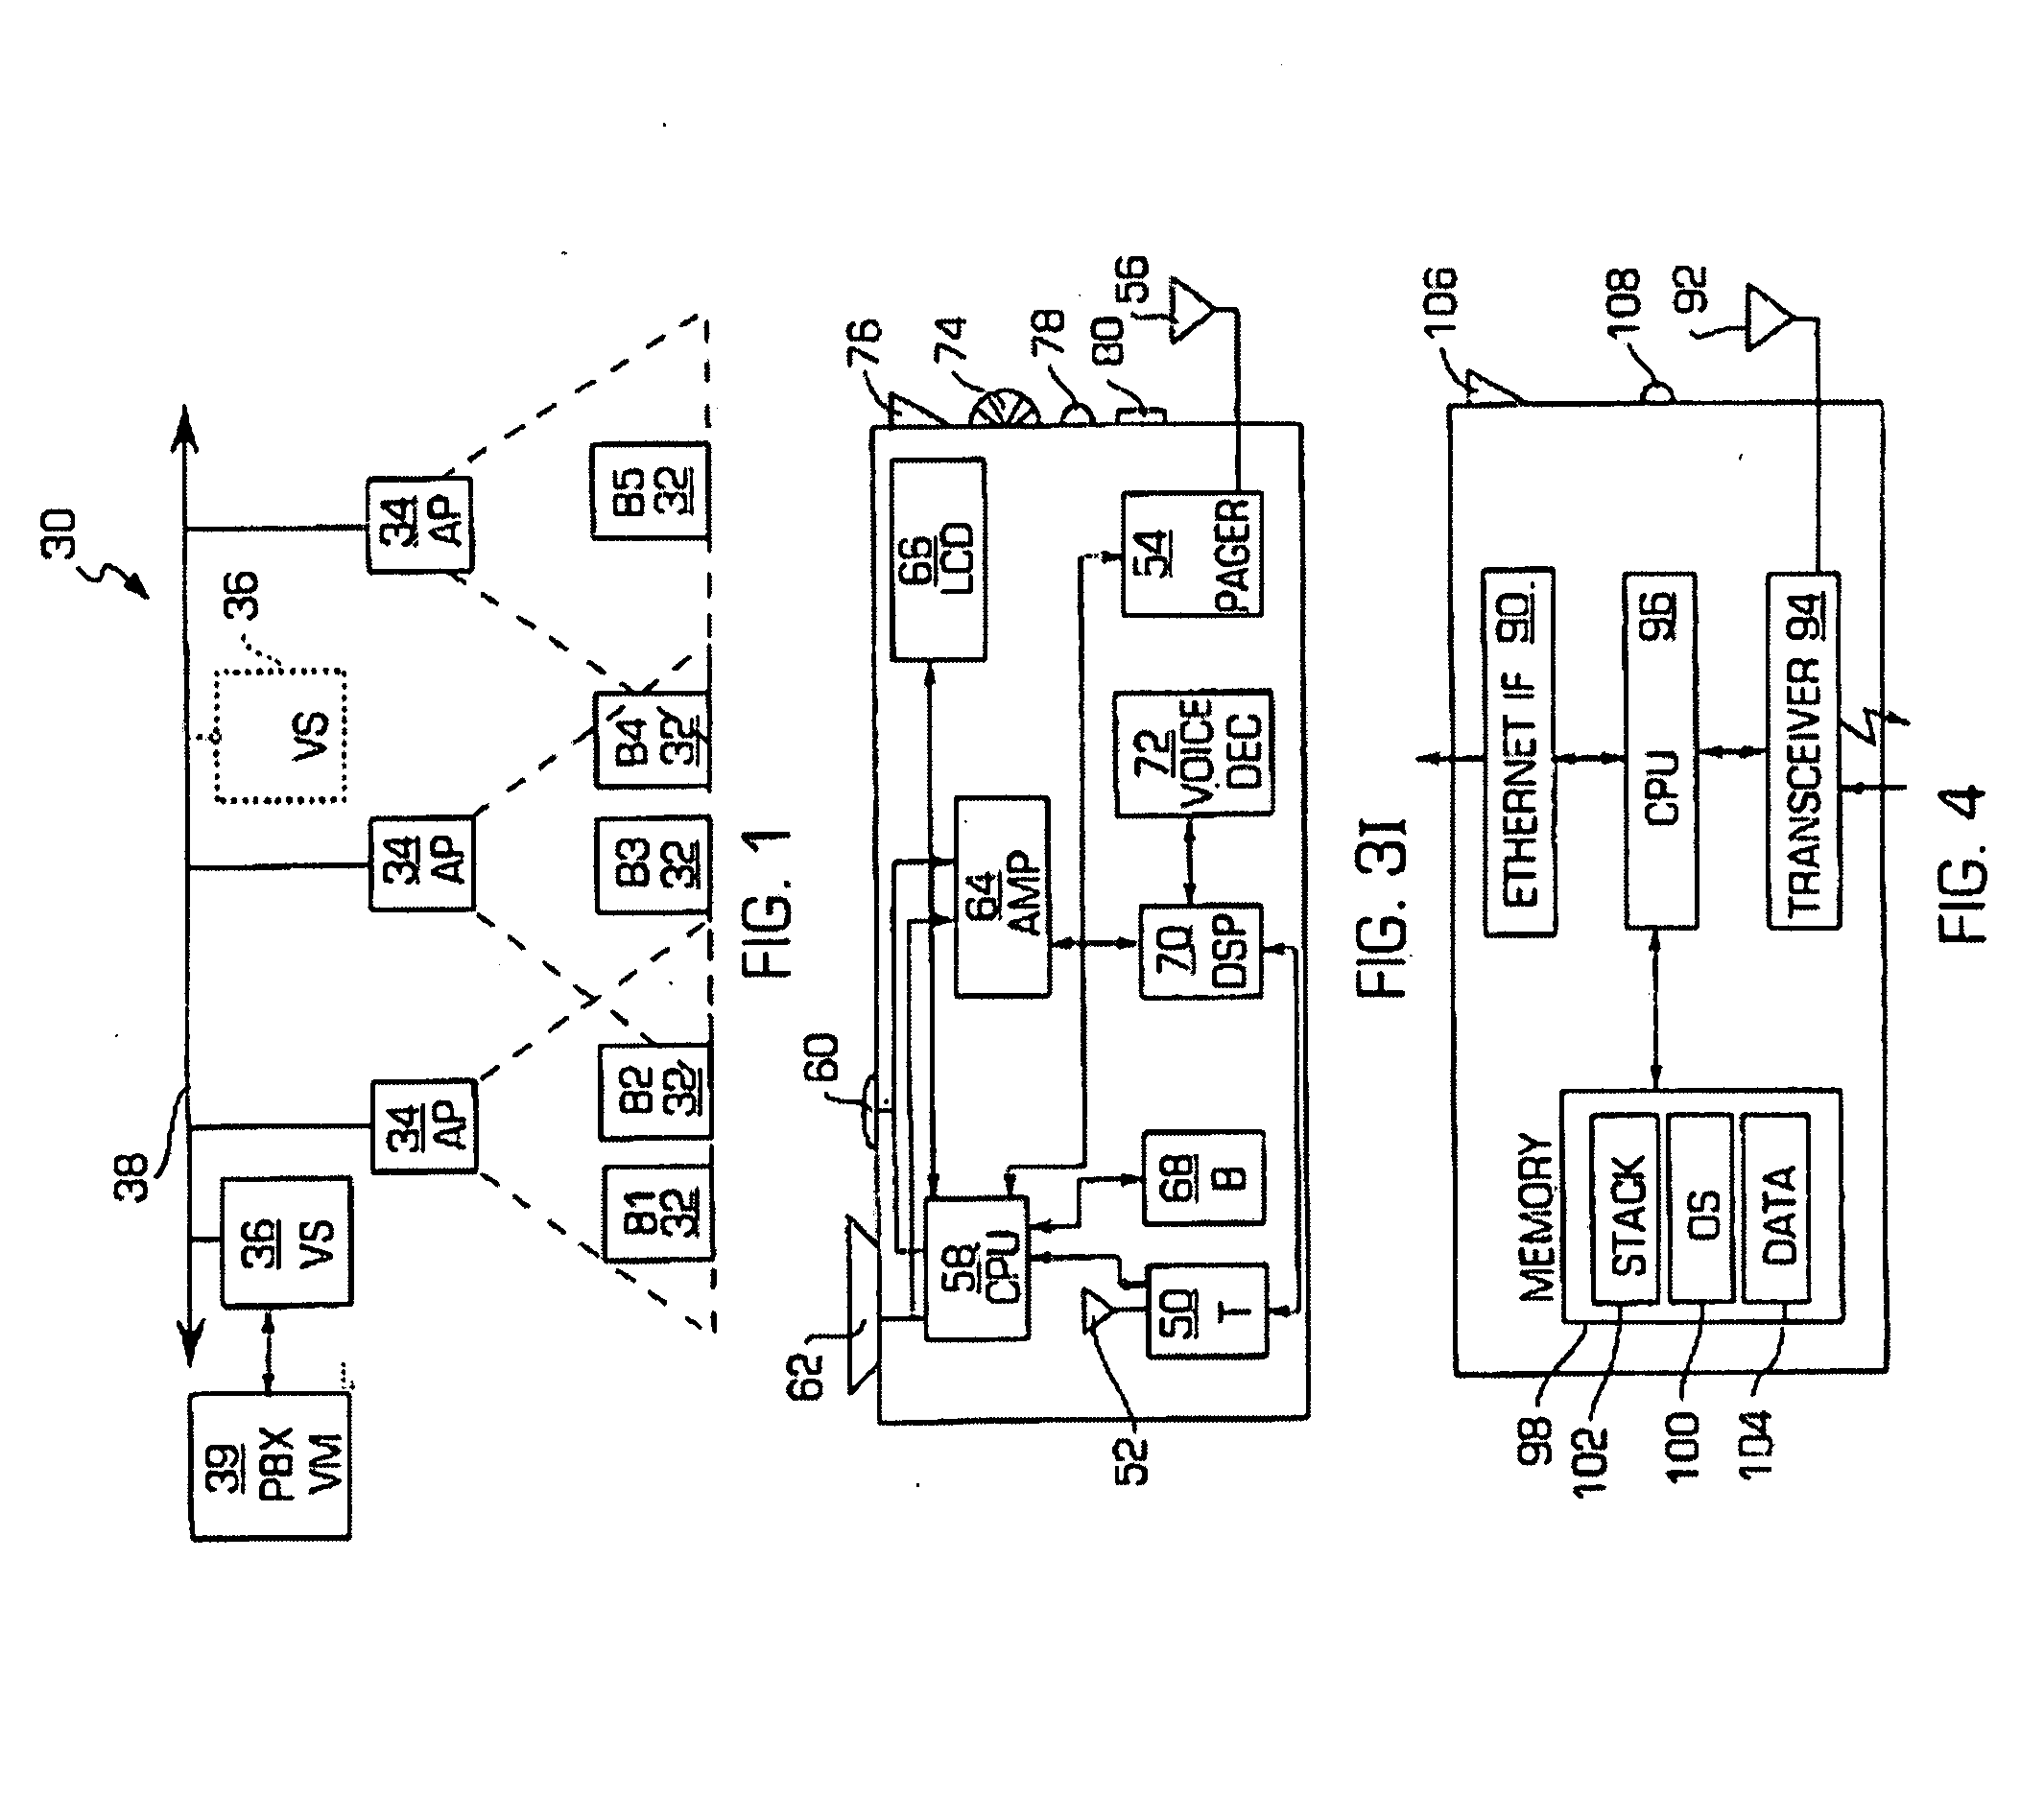 Voice-controlled communications system and method using a badge application